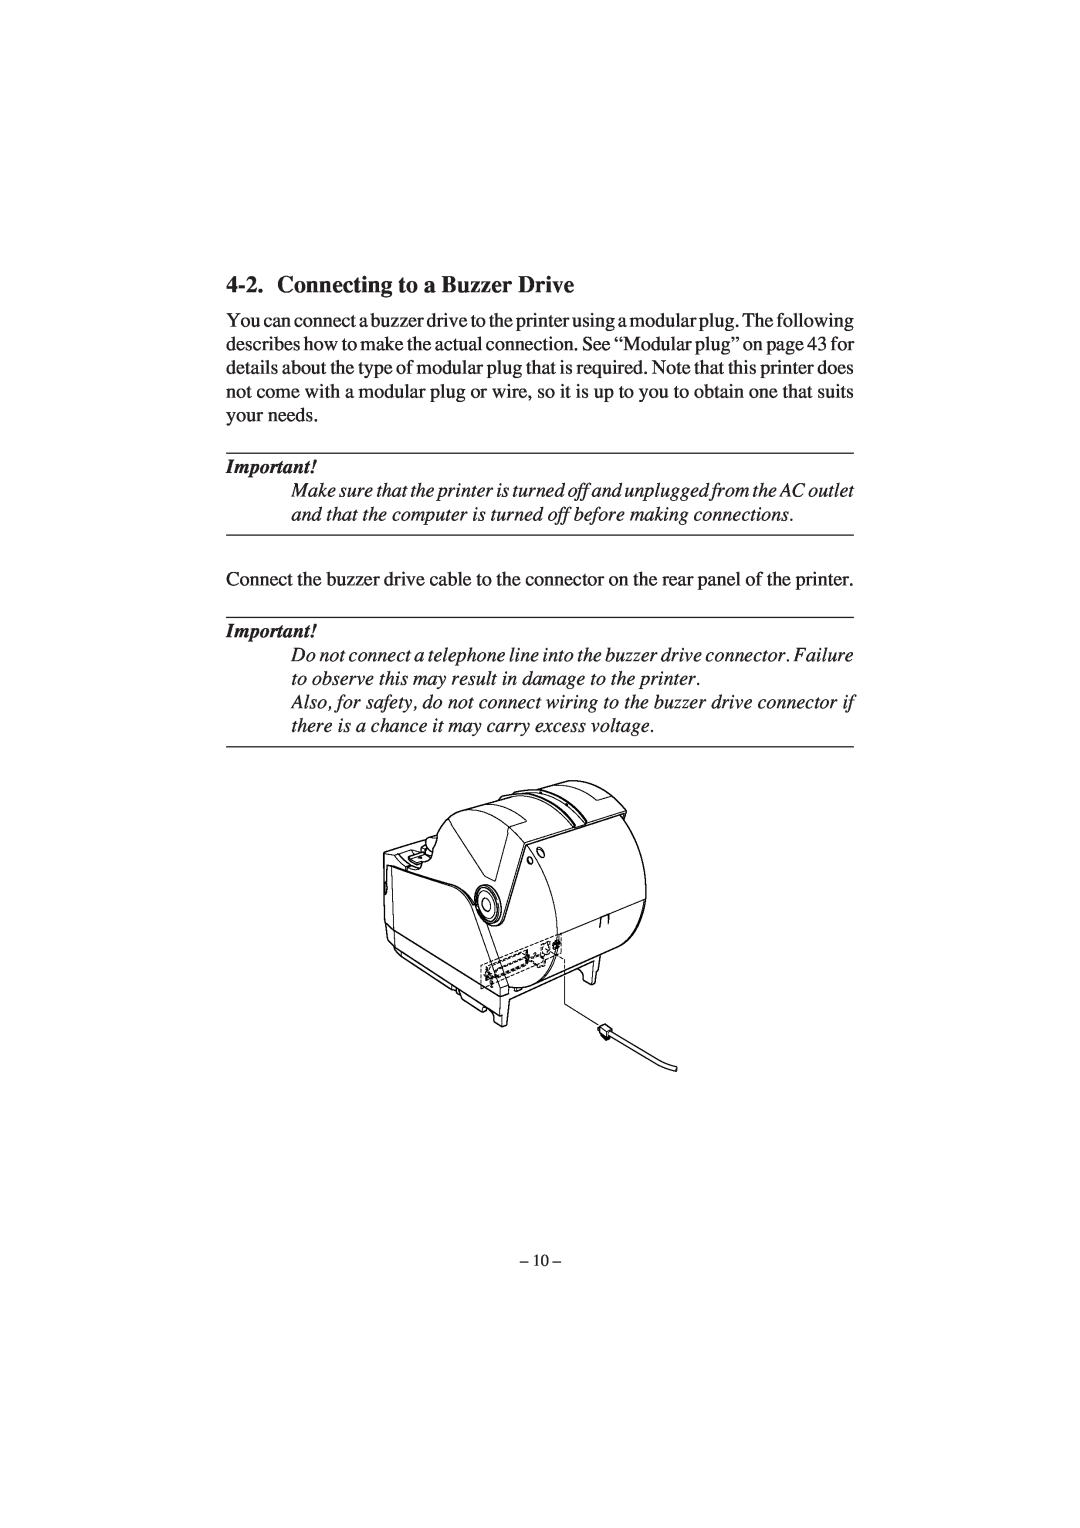 Star Micronics TSP1000 user manual Connecting to a Buzzer Drive 